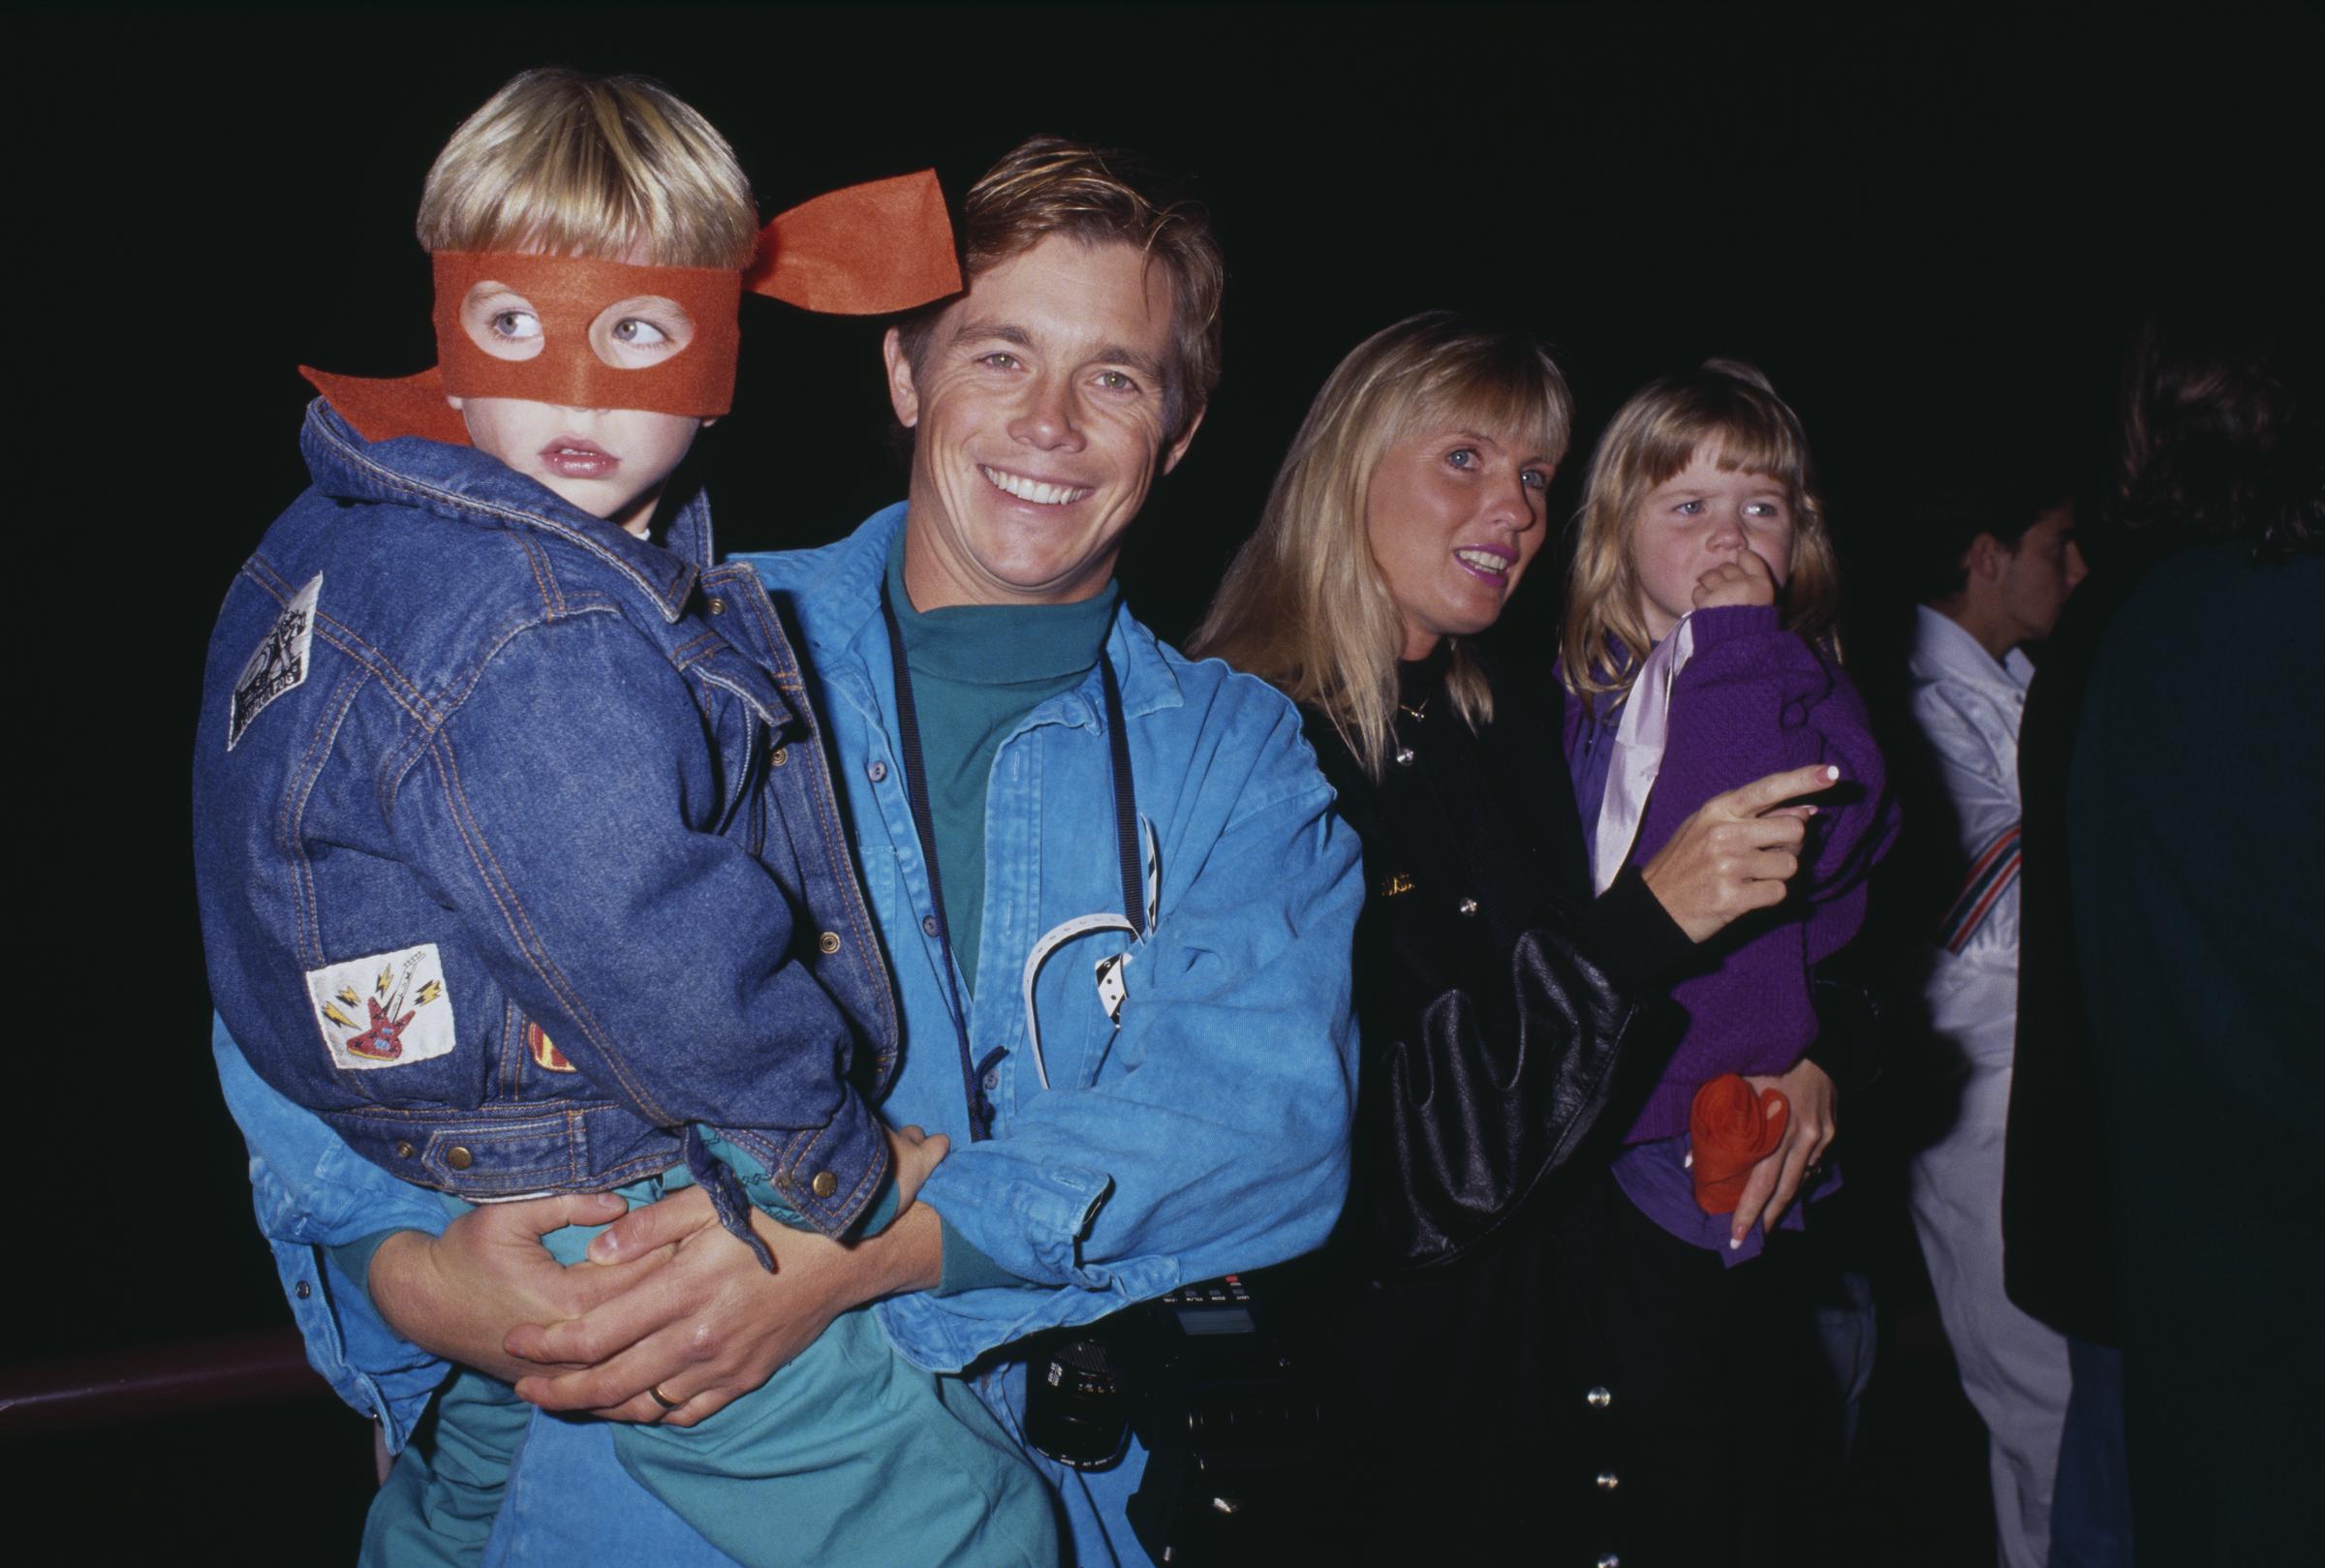 Christopher Atkins and Lyn Barron with their children at the Teenage Mutant Ninja Turtle's "Coming Out of Their Shells" Rock & Roll Tour on November 21, 1990, in Universal City, California. | Source: Getty Images